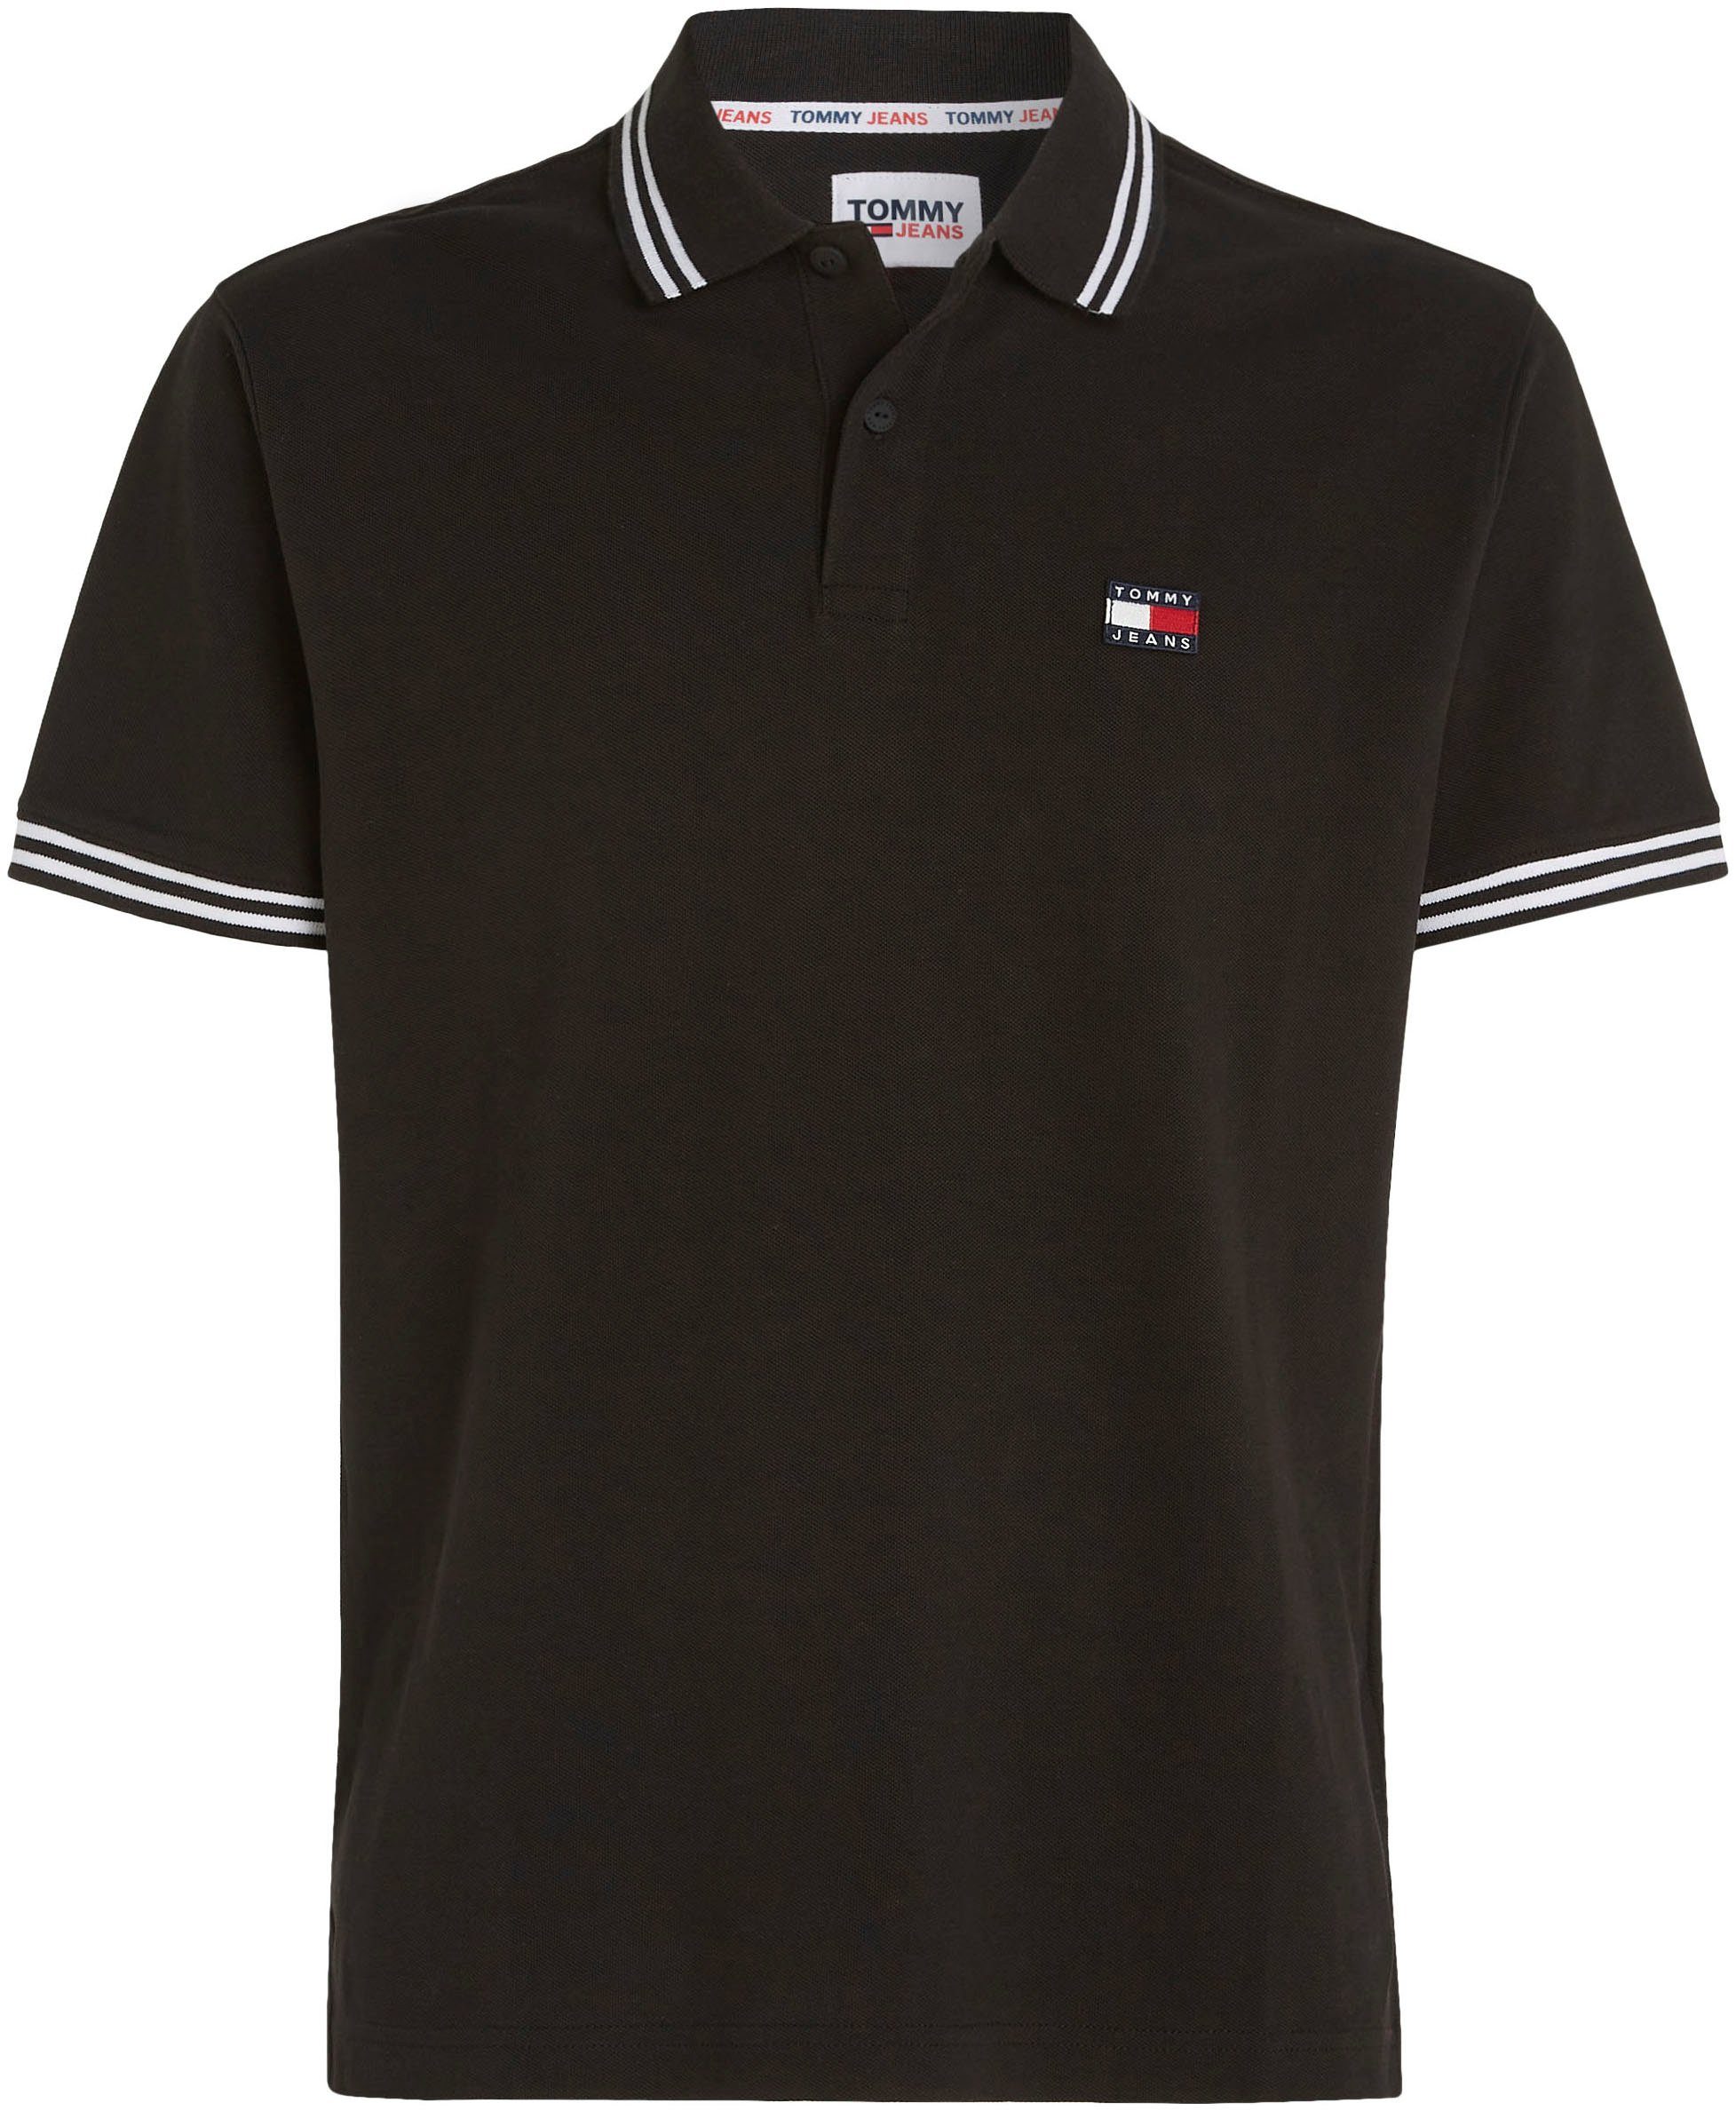 POLO Poloshirt Tommy TIPPING Jeans DETAIL CLSC Black TJM